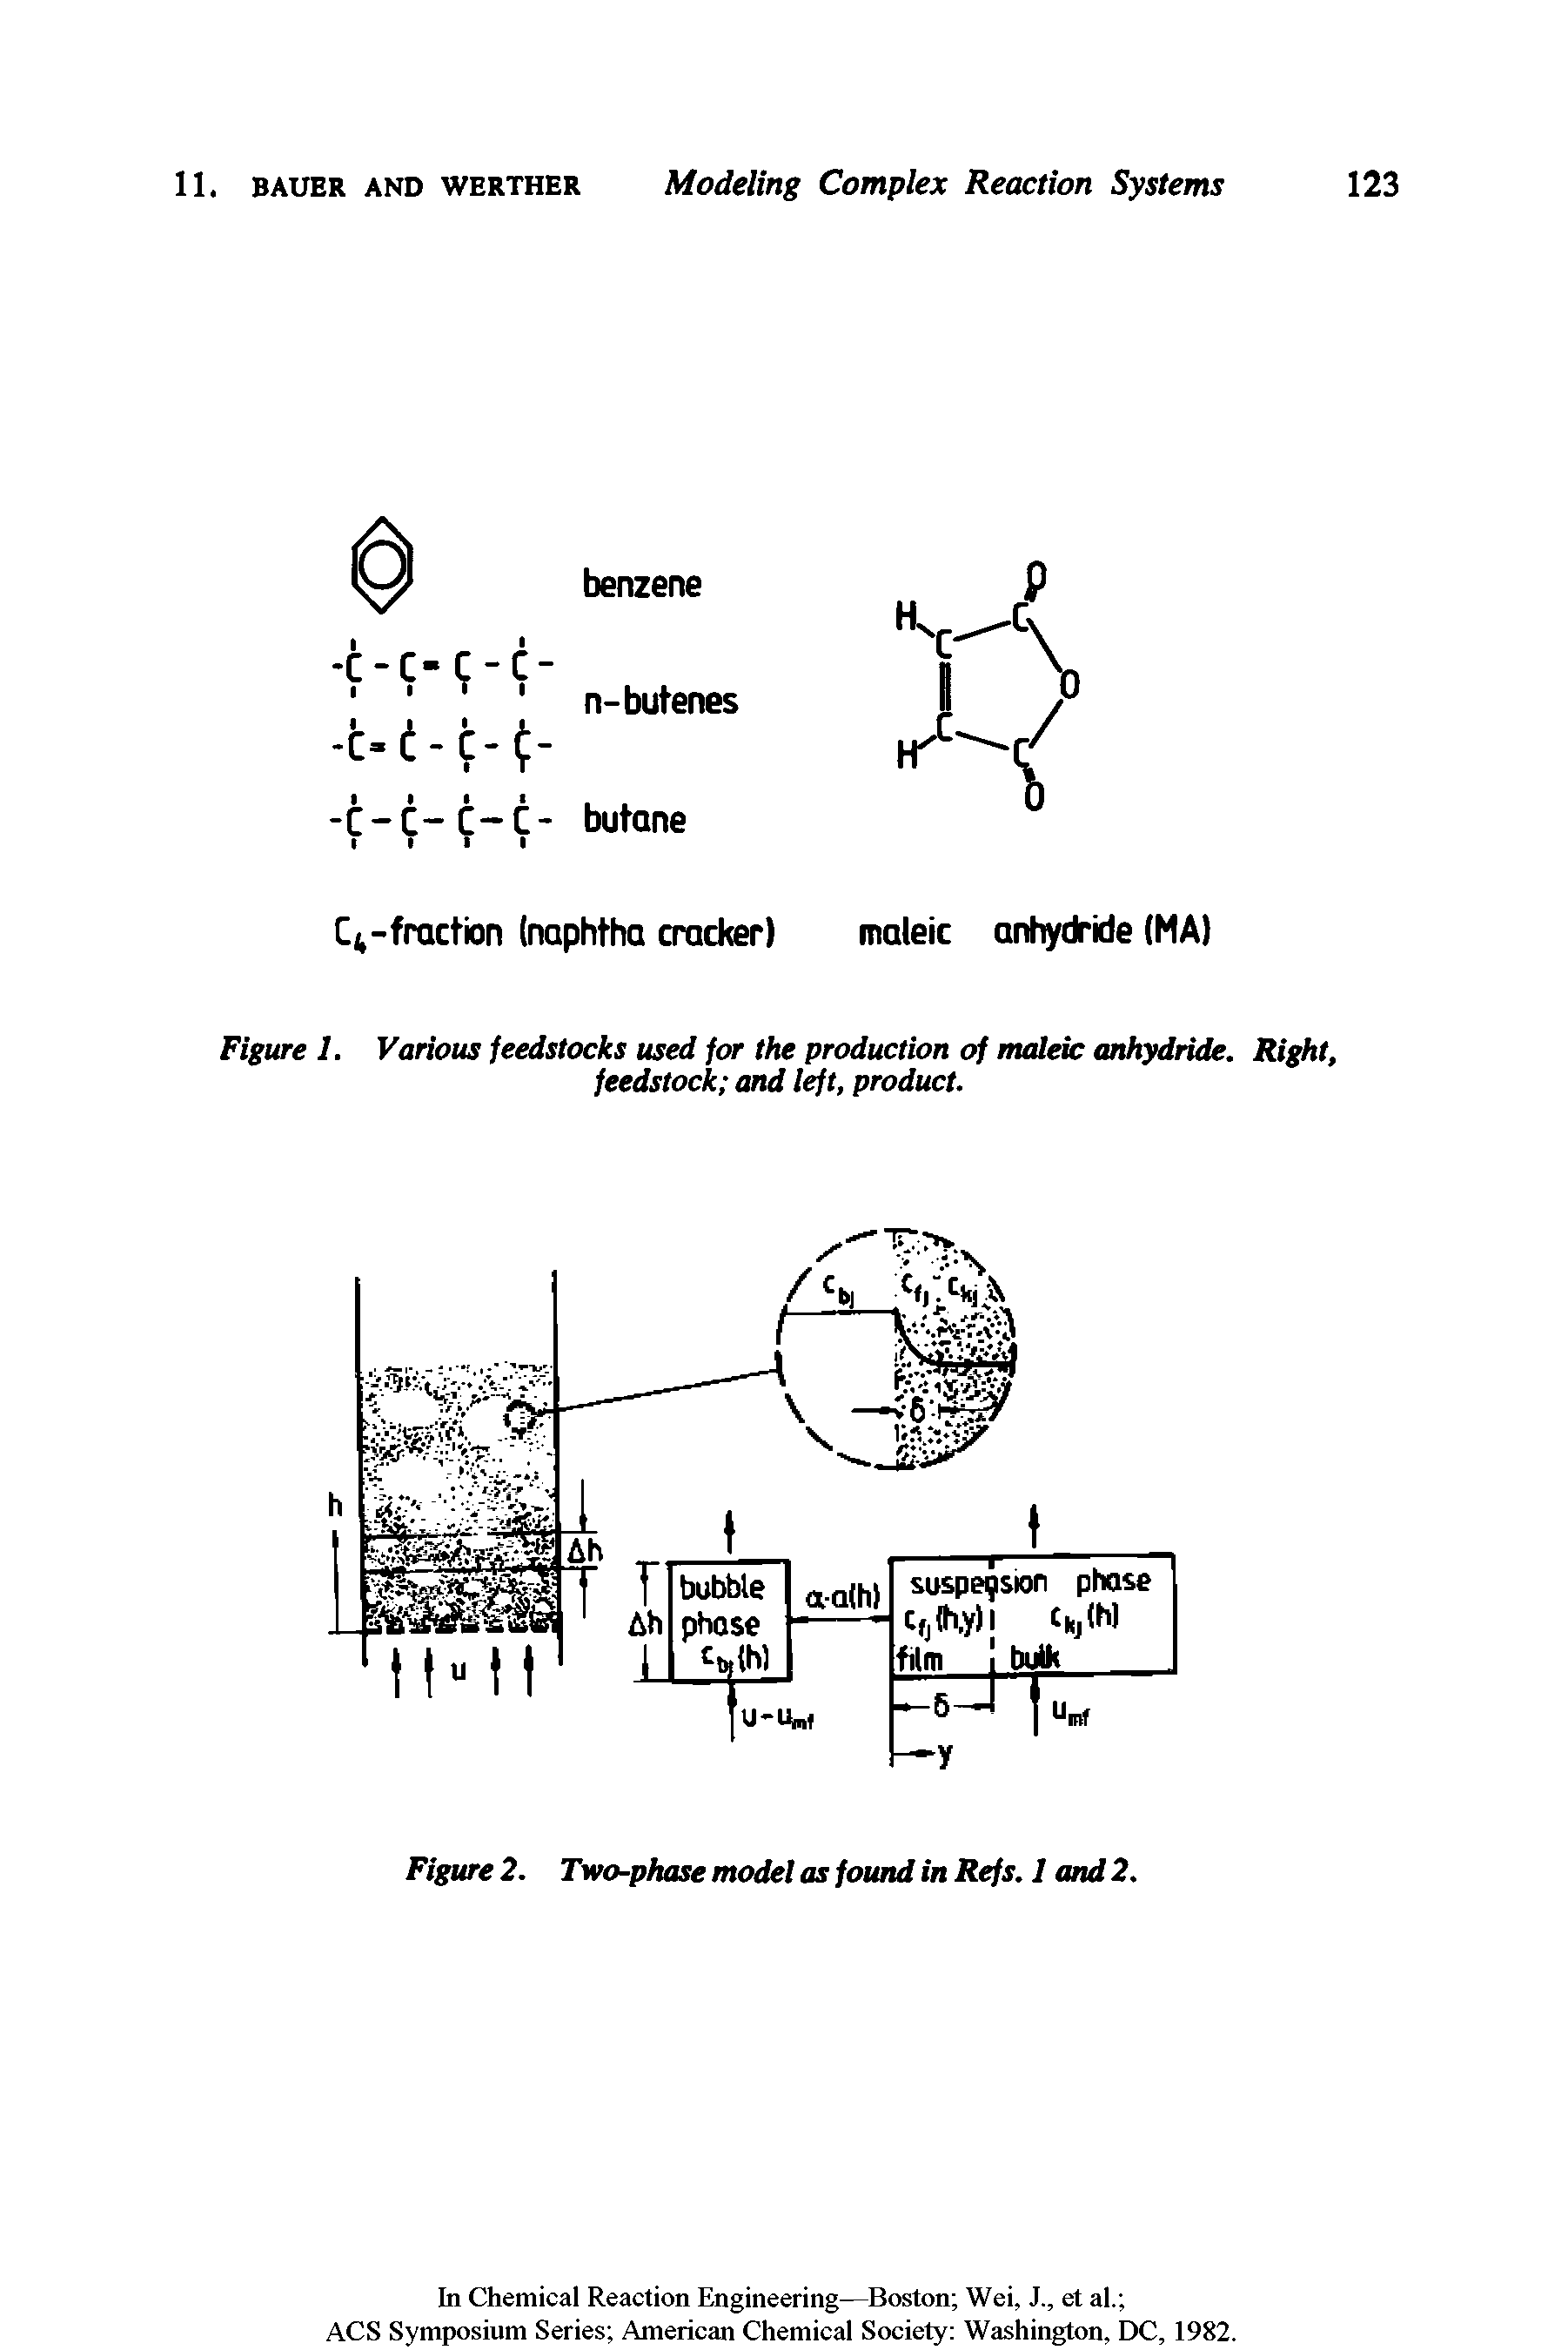 Figure 1. Various feedstocks used for the production of maleic anhydride. Right, feedstock and left, product.